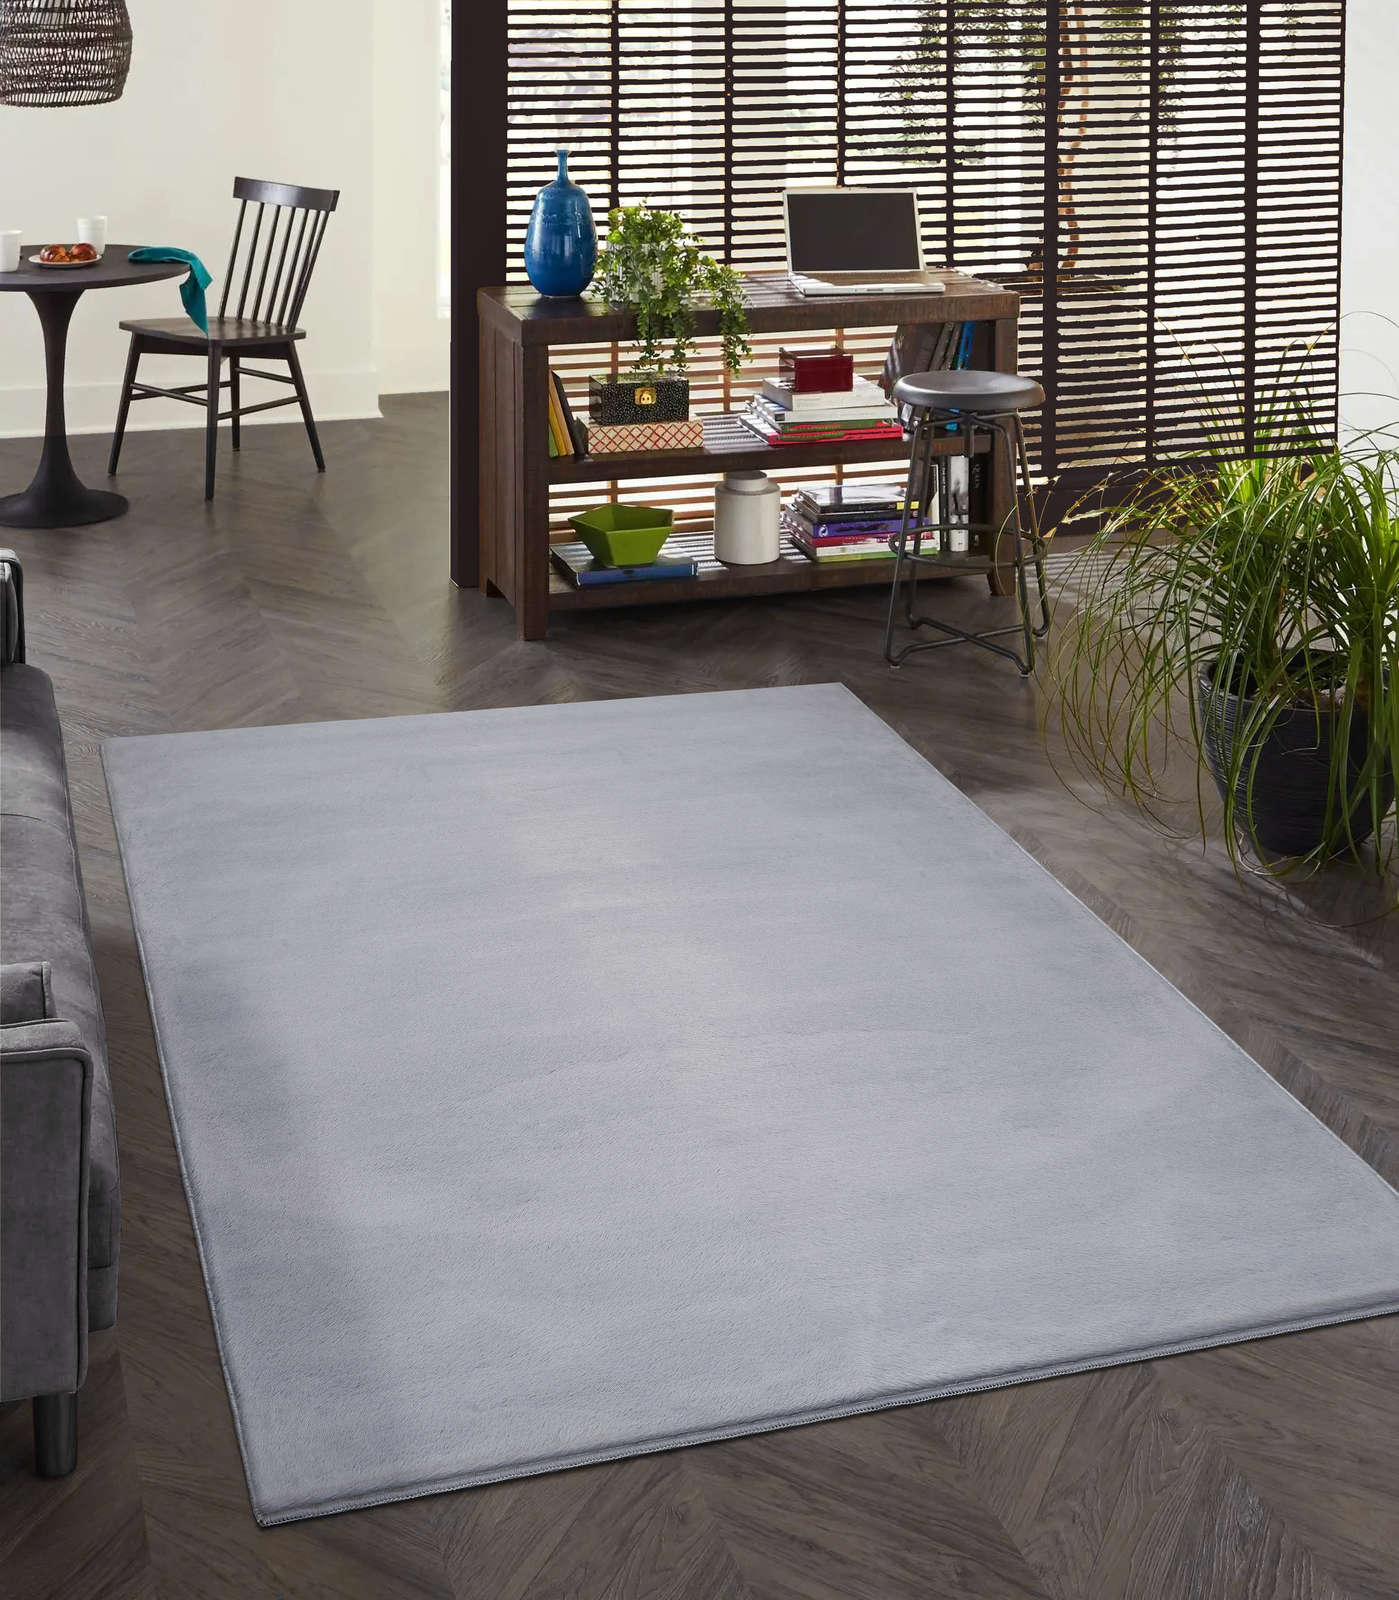             Comfortable high pile carpet in soft grey - 340 x 240 cm
        